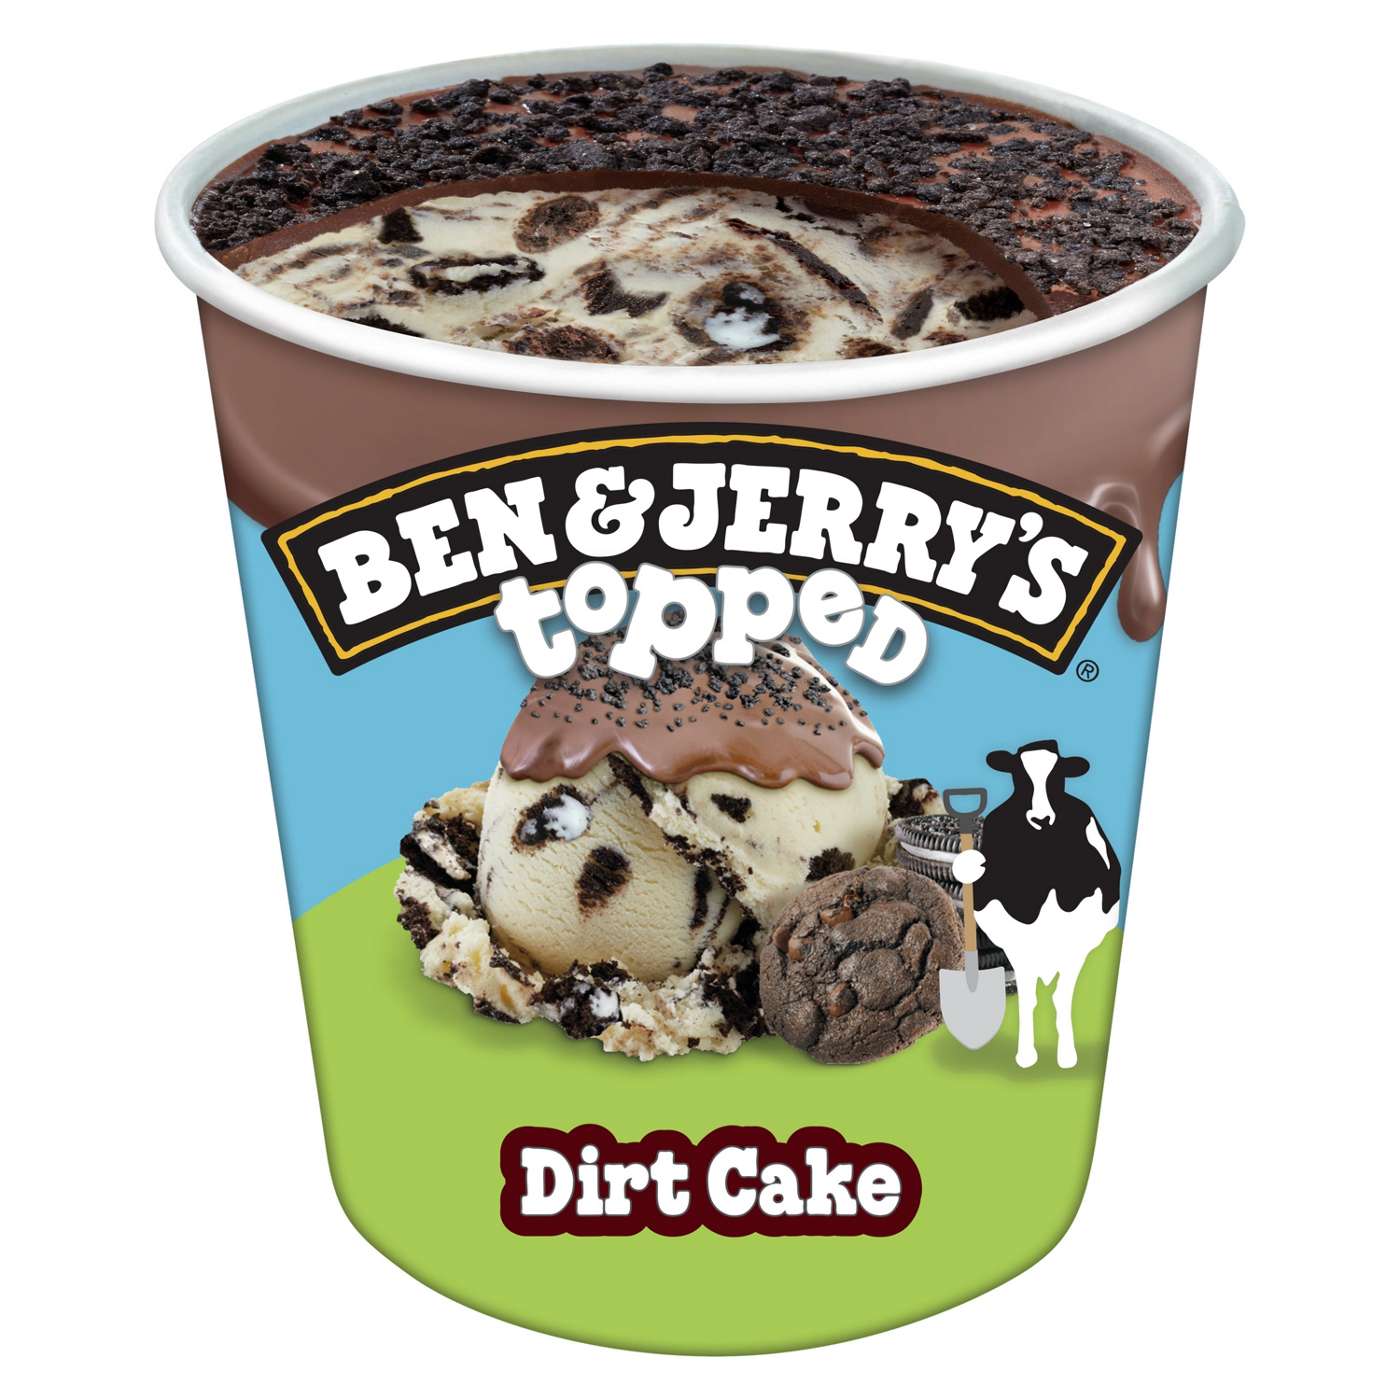 Ben & Jerry's Topped Dirt Cake Ice Cream; image 2 of 6